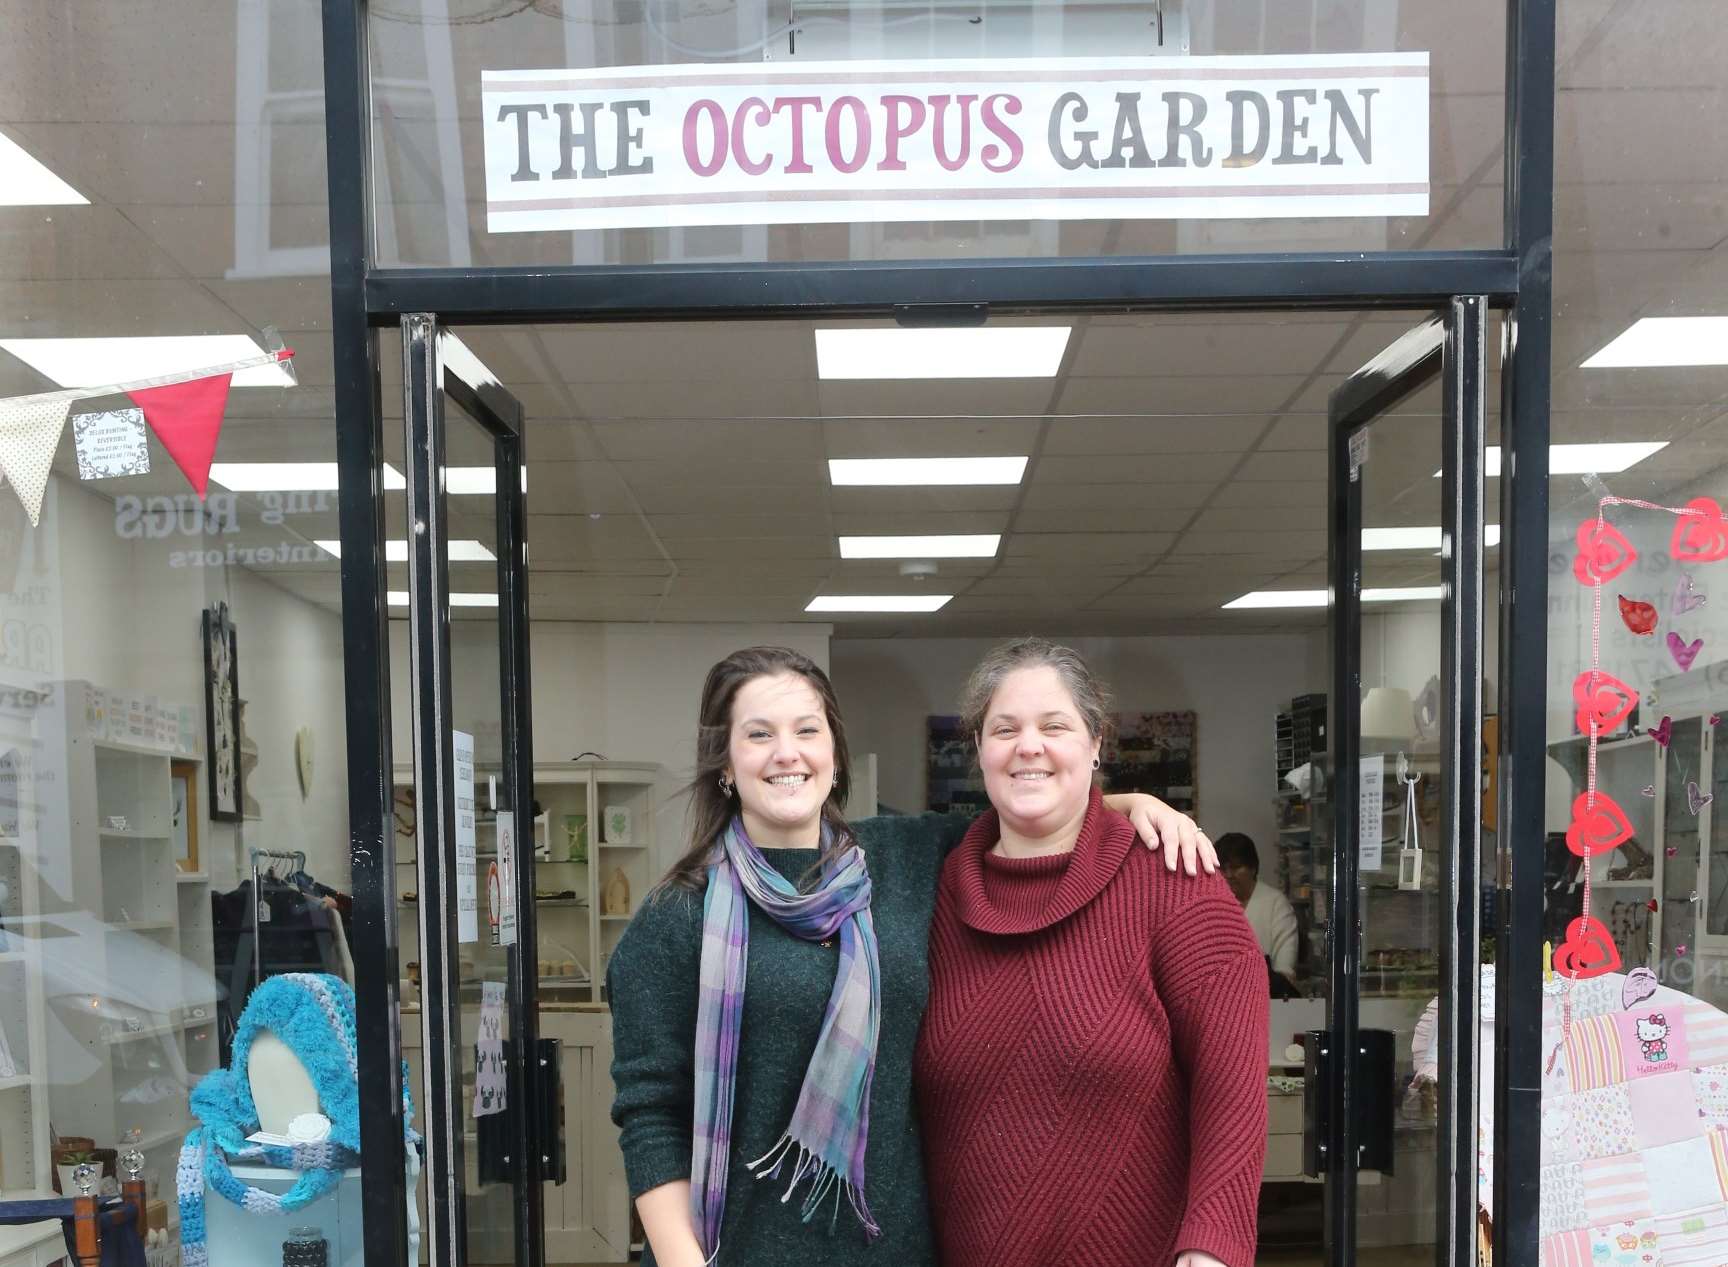 From left, Sonia Gardner and her sister, Zena, both Business Partners, at the Grand Opening of The Octopuss Garden in Sittingbourne High Street